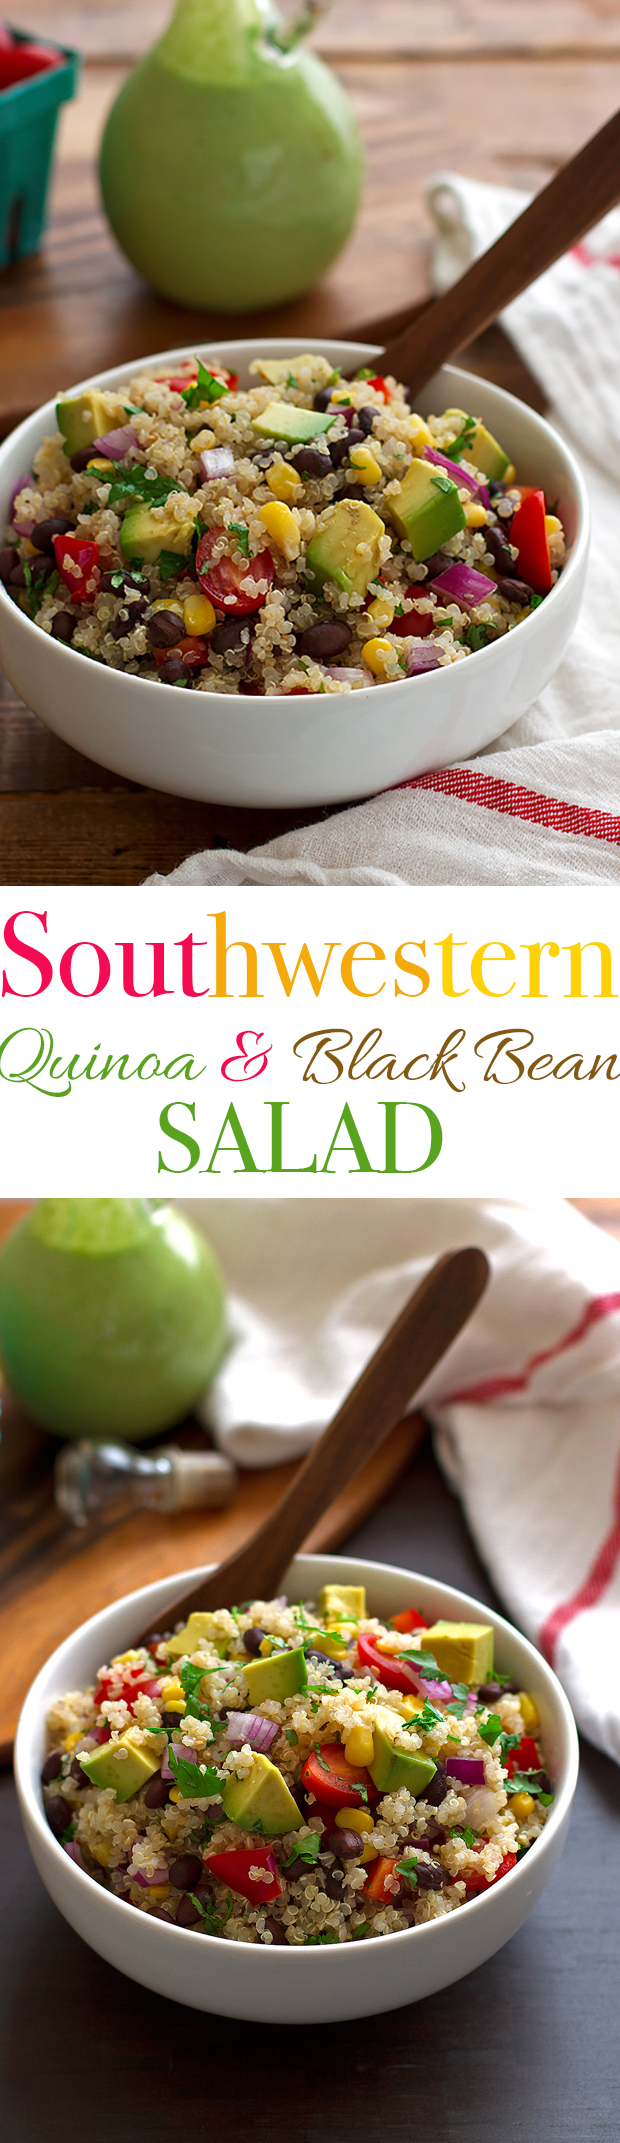 Easy southwestern quinoa and black bean salad uses leftover quinoa and takes just 15 minutes to make. The perfect quick and healthy lunch! #quinoasalad #southwesternsalad #blackbeansalad | Littlespicejar.com